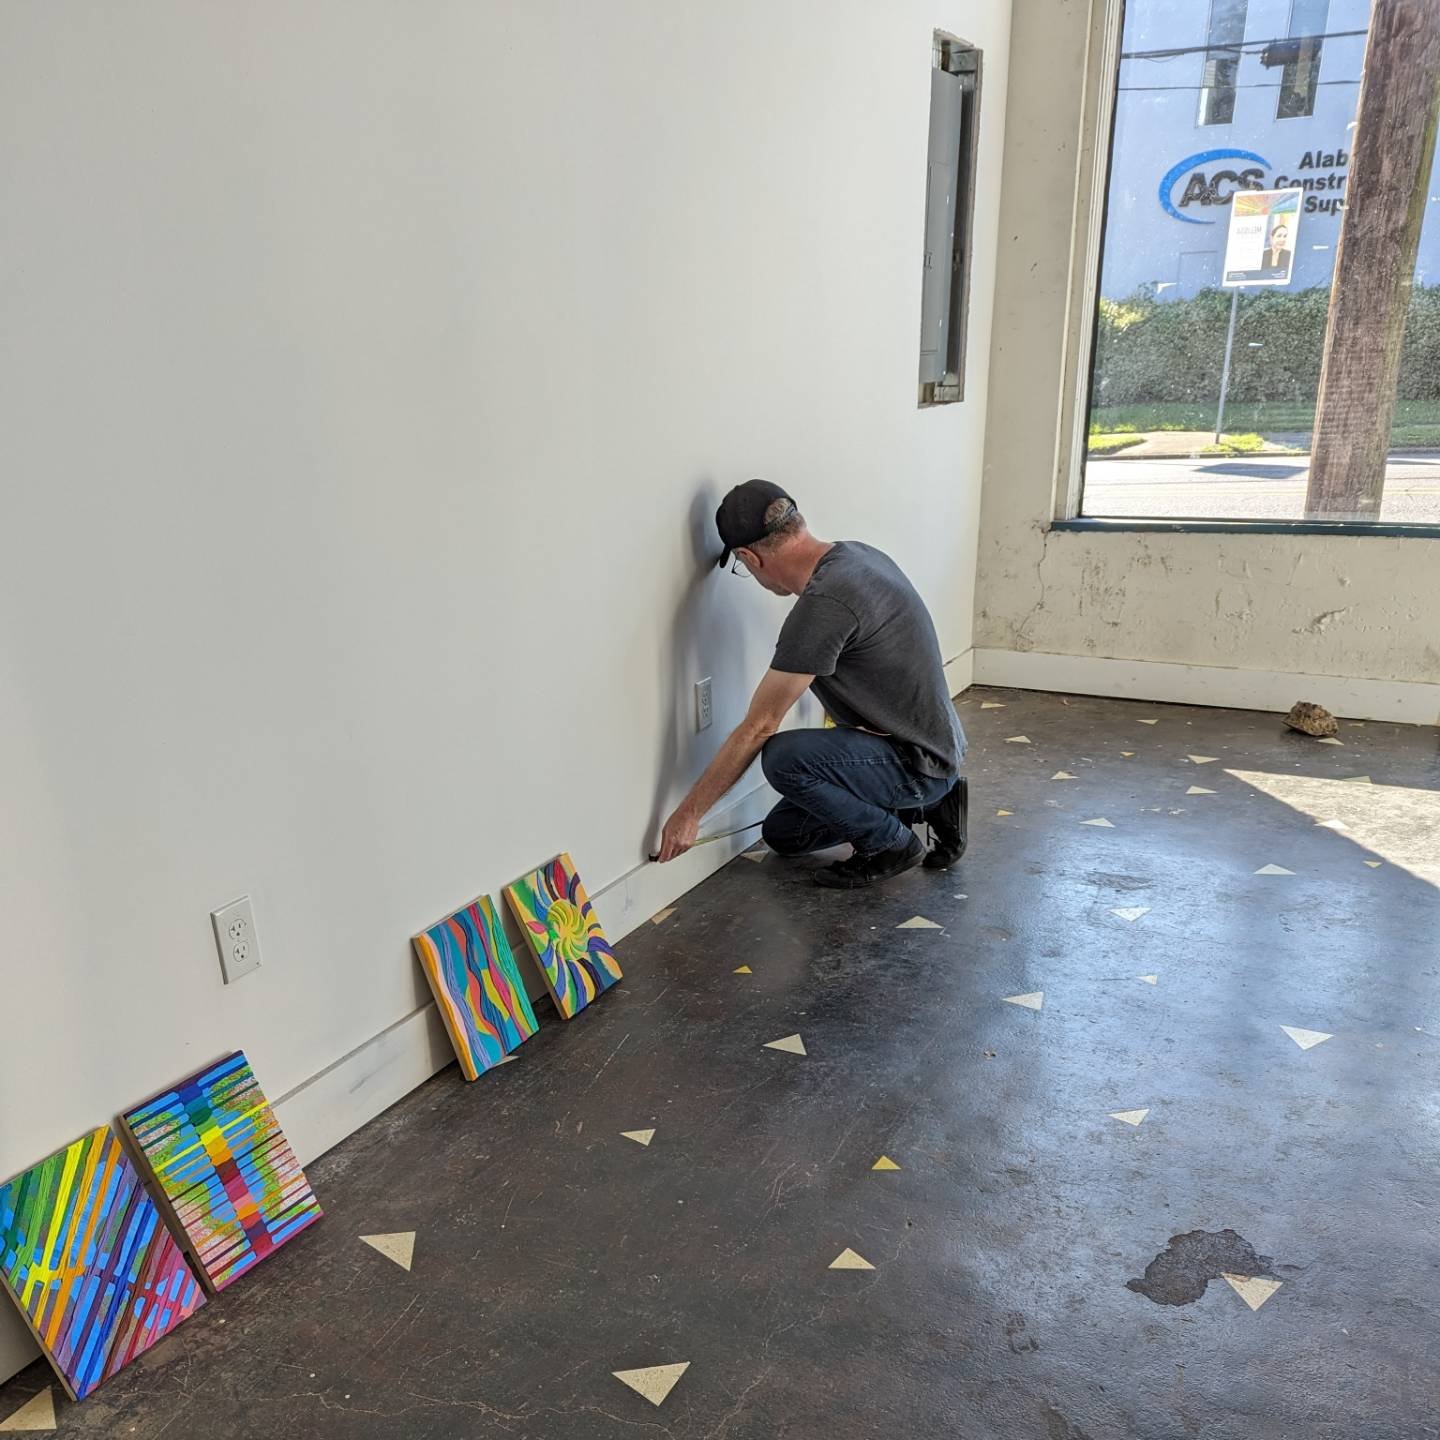 Install Day at @theoldbailey.gallery !!!

&quot;Melissa Staiger: Finding The Sun&rdquo;

Sat, May 25th, 6-10pm. Opening party and reception.
Sun, May 26th, 12-4pm. Gallery hours and artist talk.

The Old Bailey Gallery
4909 5th Avenue South
Birmingha